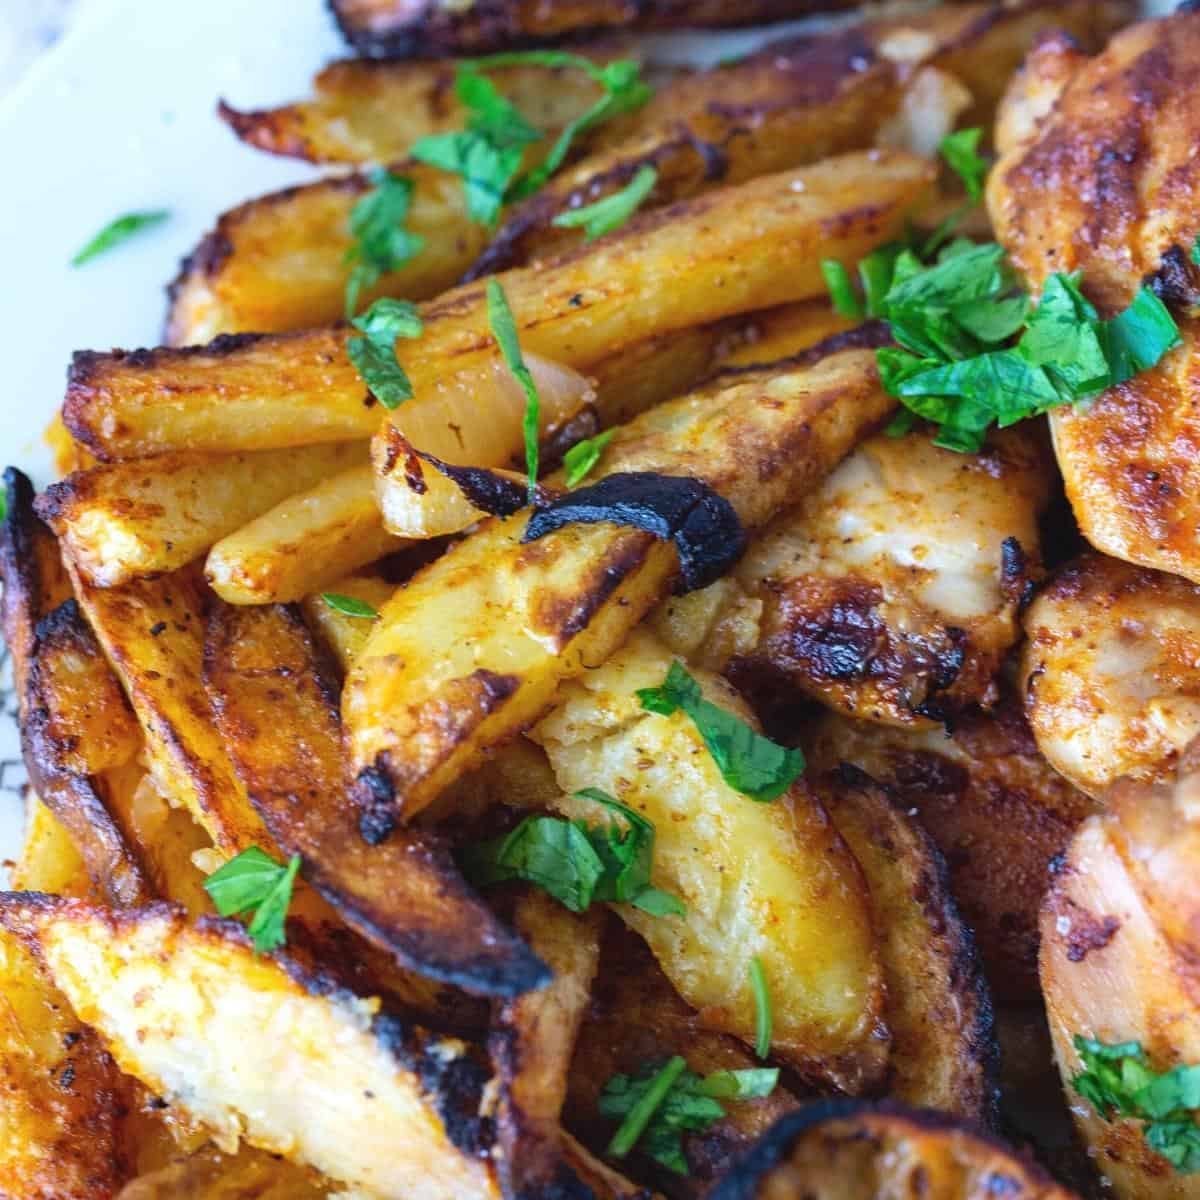 Roasted potatoes on the plate.